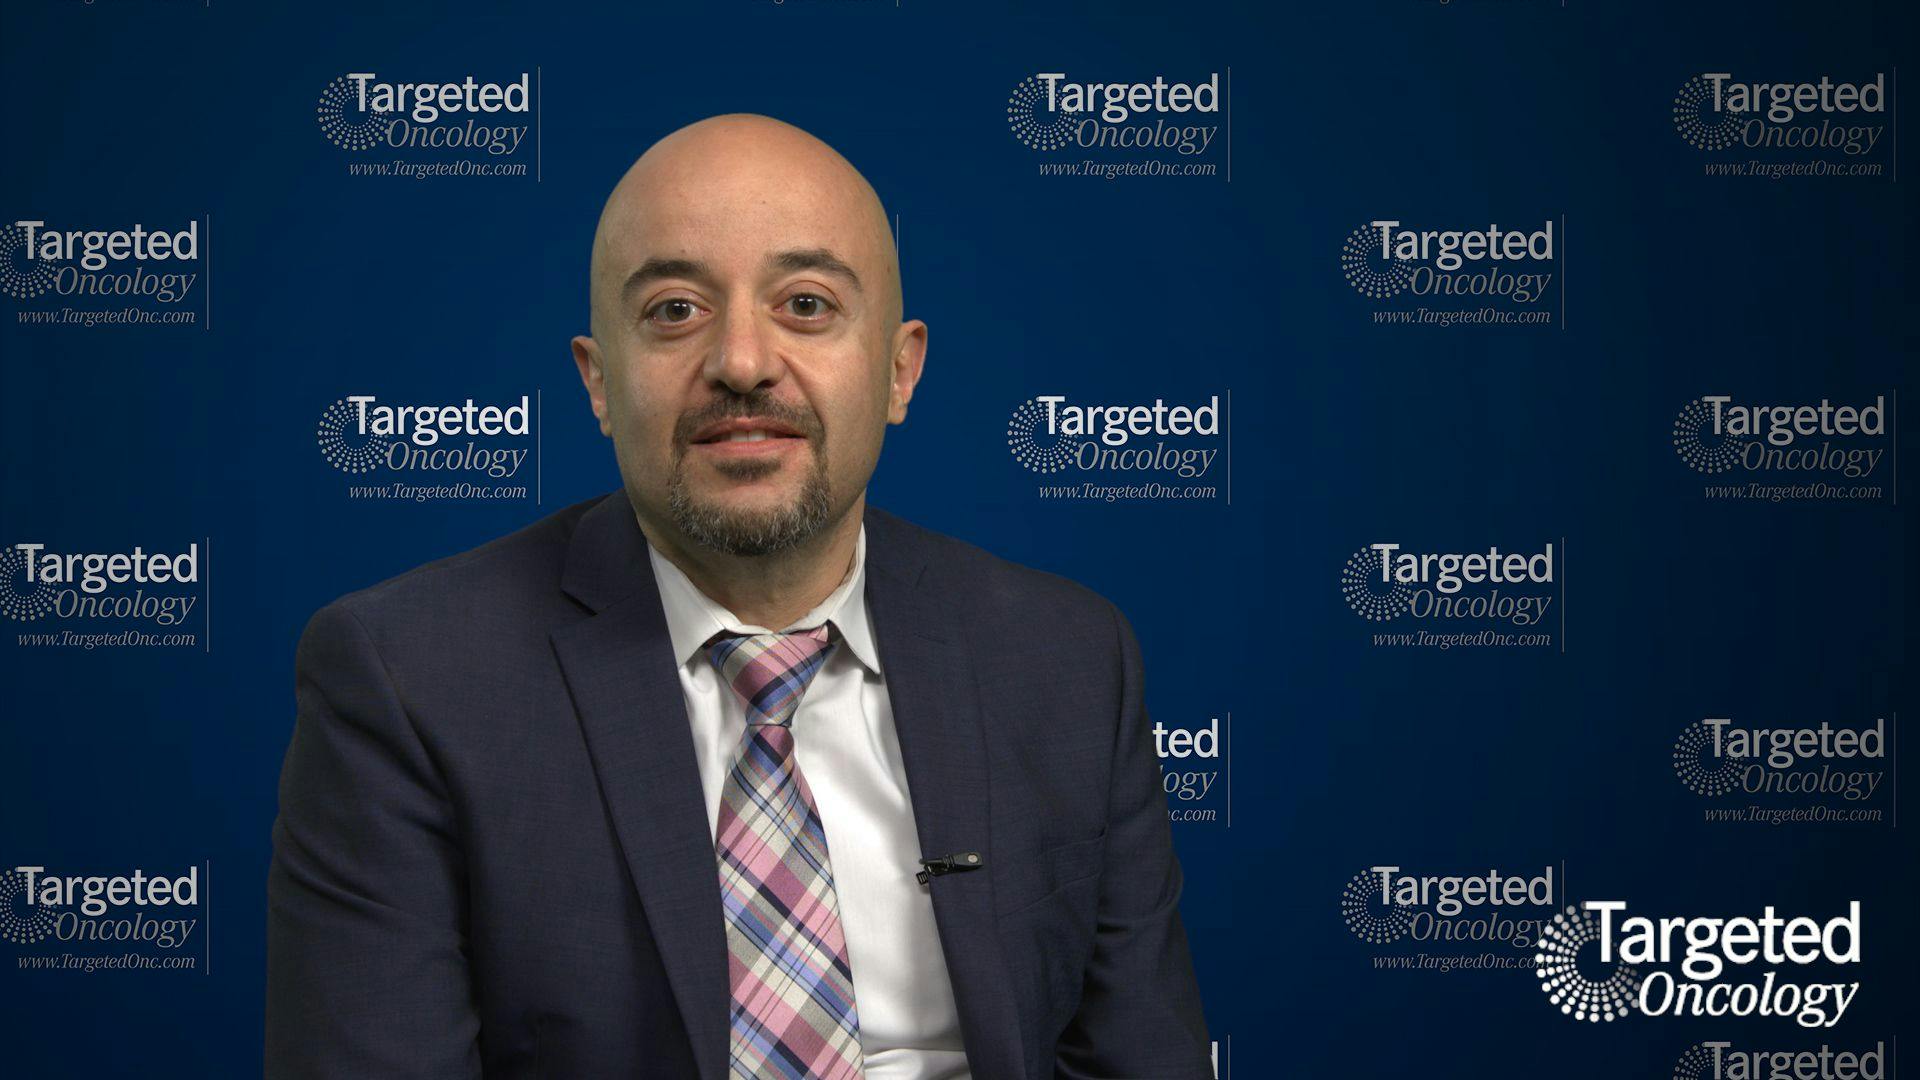 Treatment Options and Care for Patients Who Develop Therapy-Related AML